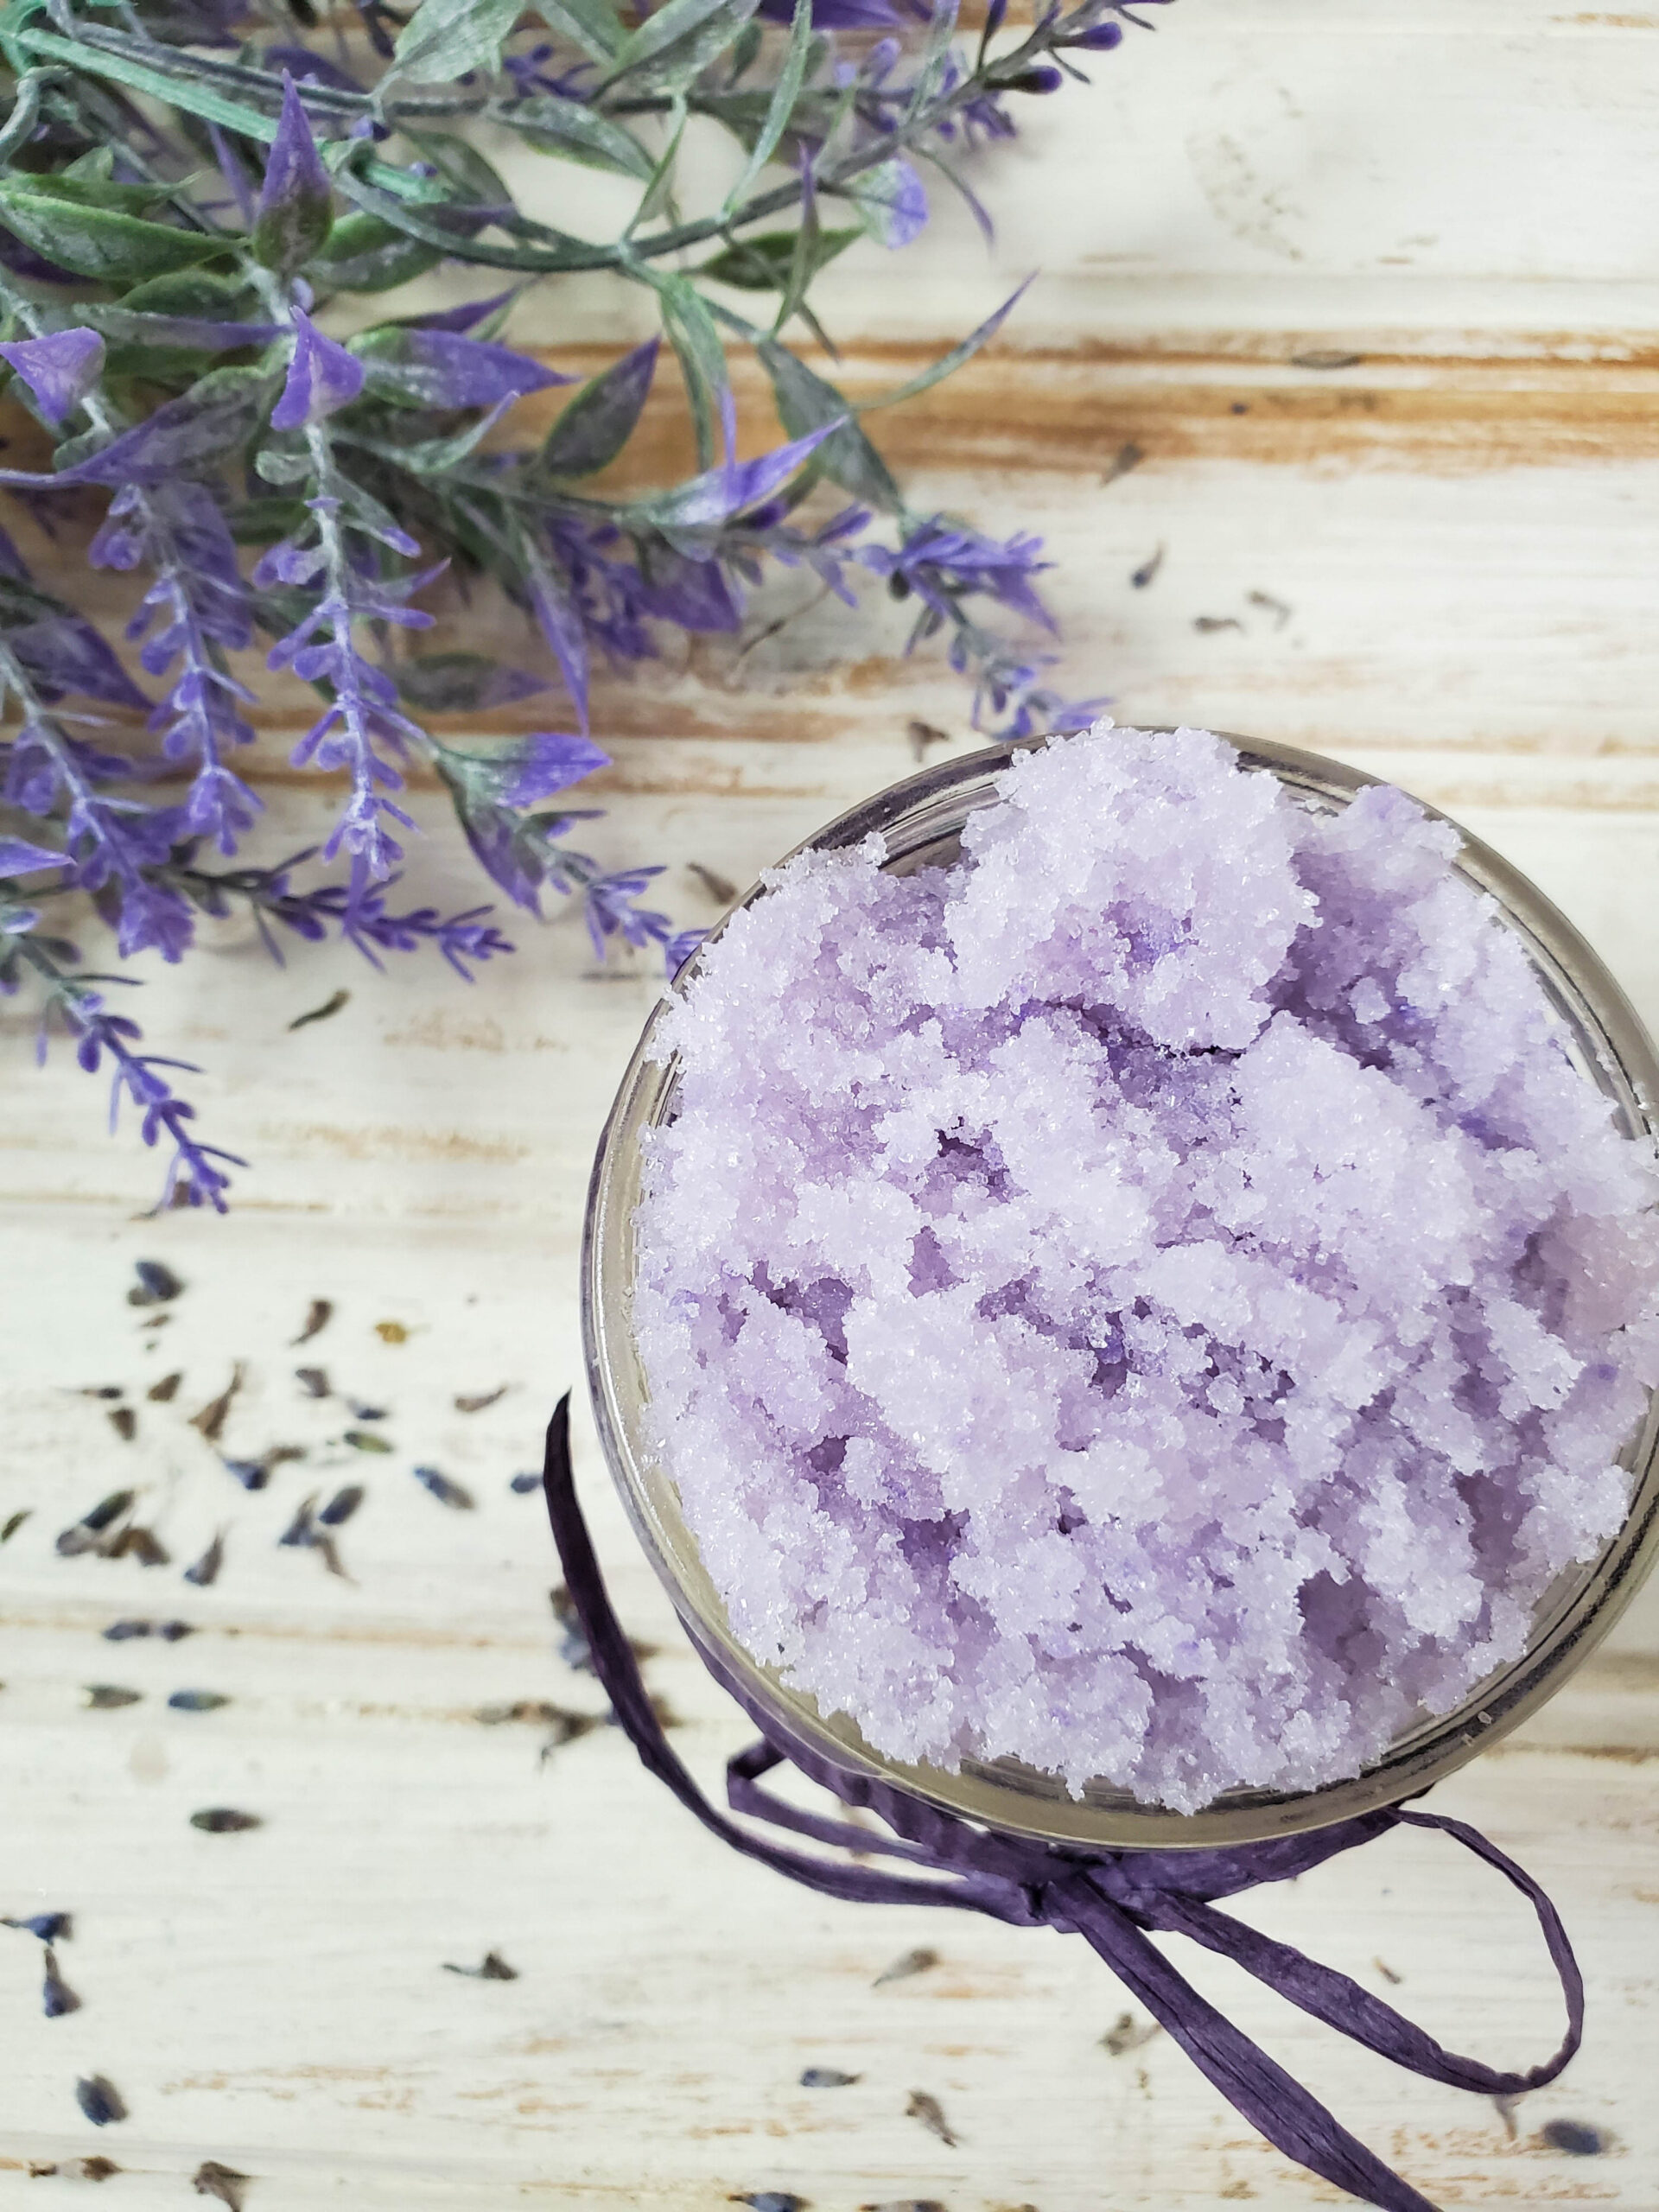 This lavender and honey sugar scrub is a wonderful homemade scrub recipe, and is super easy to make.